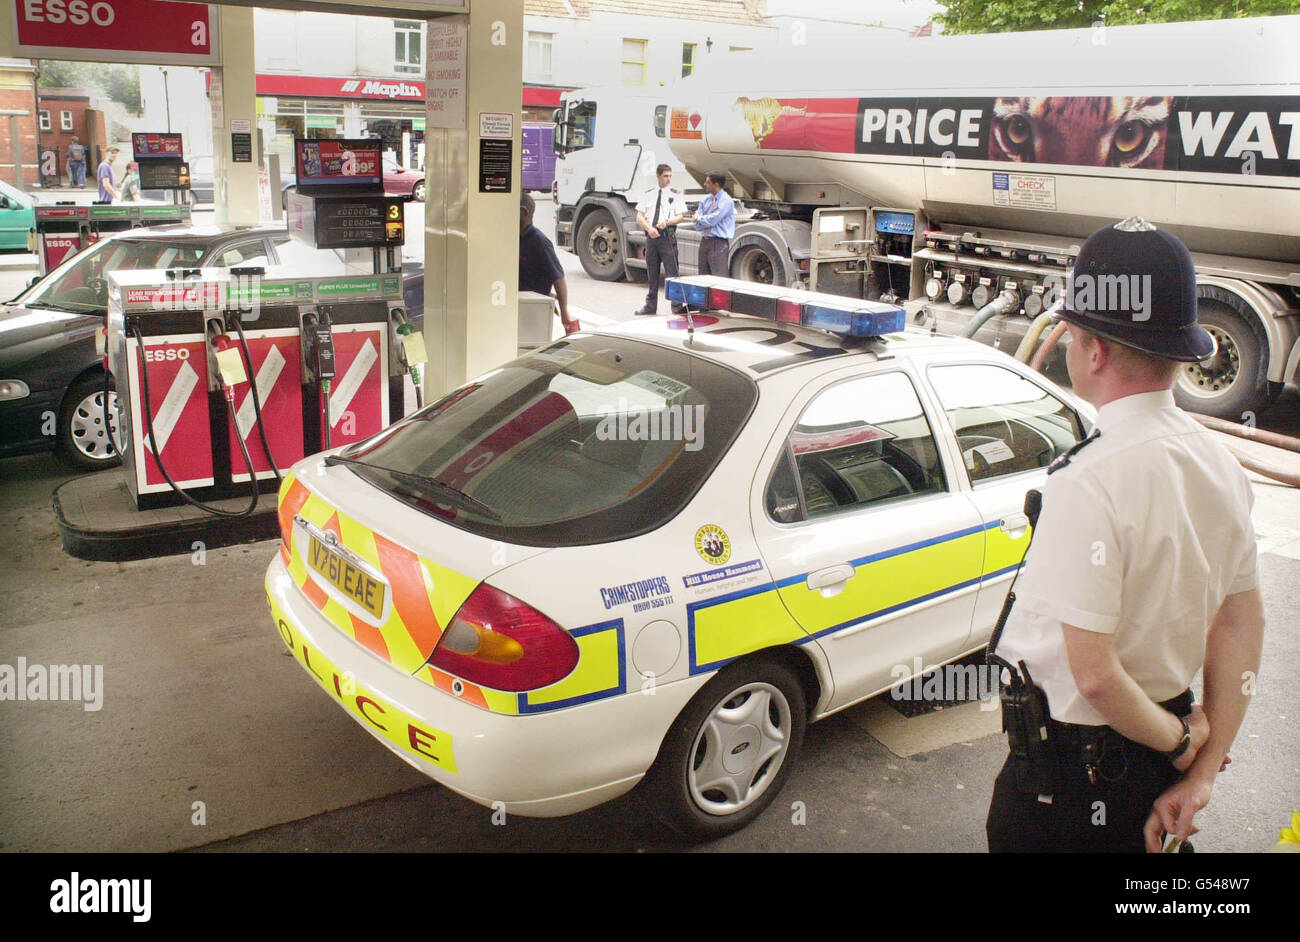 A policeman monitors a delivery of fuel to an Esso garage in Gloucester Road in Horfield, Bristol. The tanker had earlier left Avonmouth Docks. Stock Photo